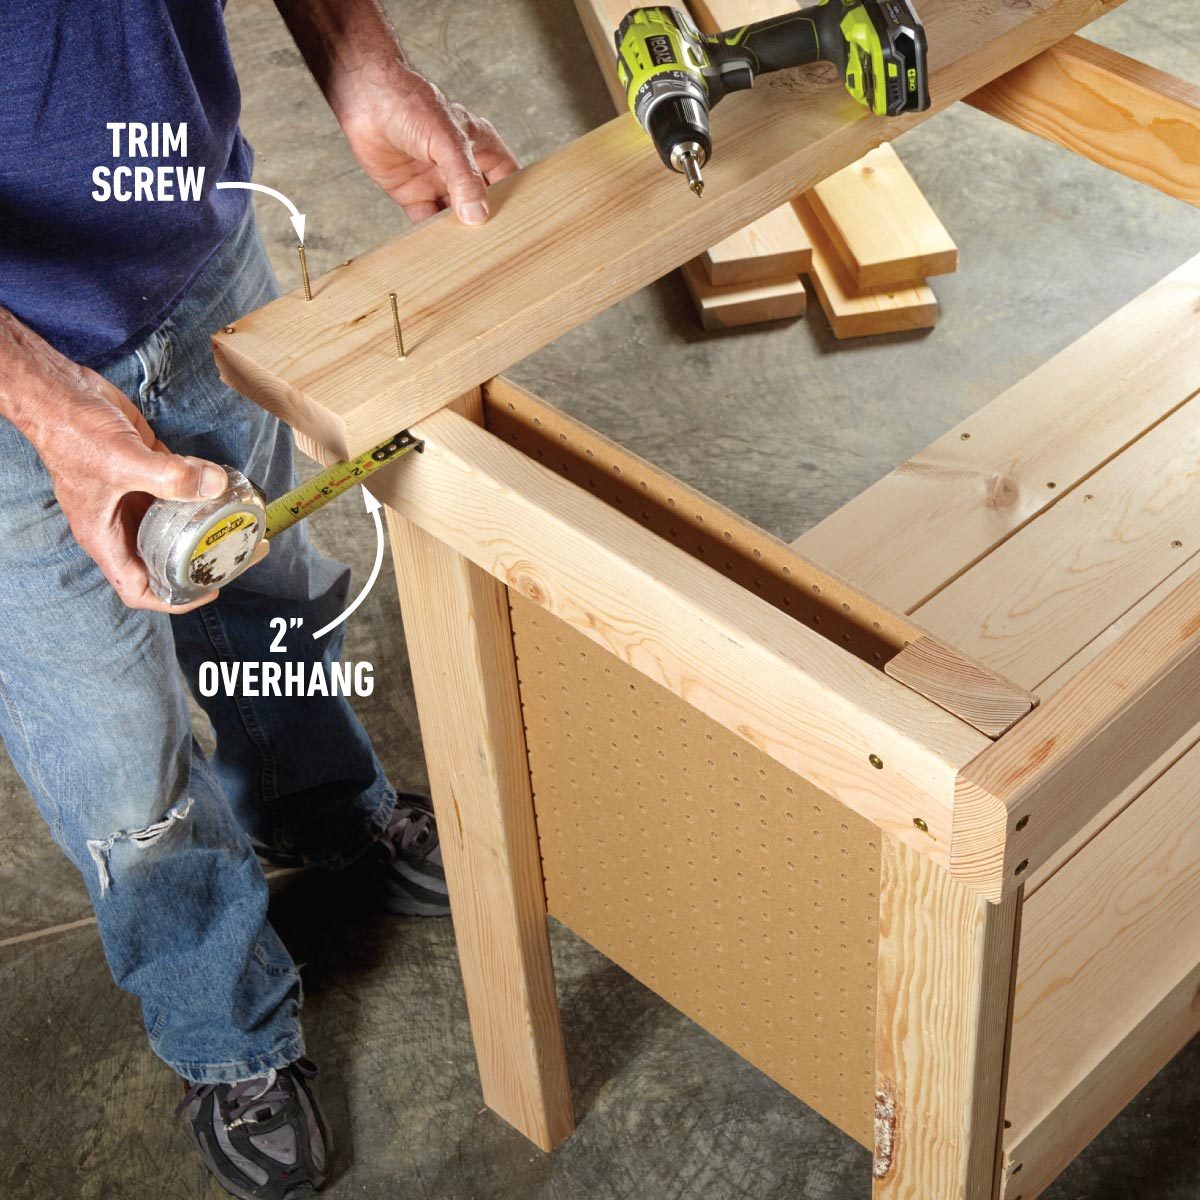 Classic Diy Workbench Plans Mounting the Top Boards